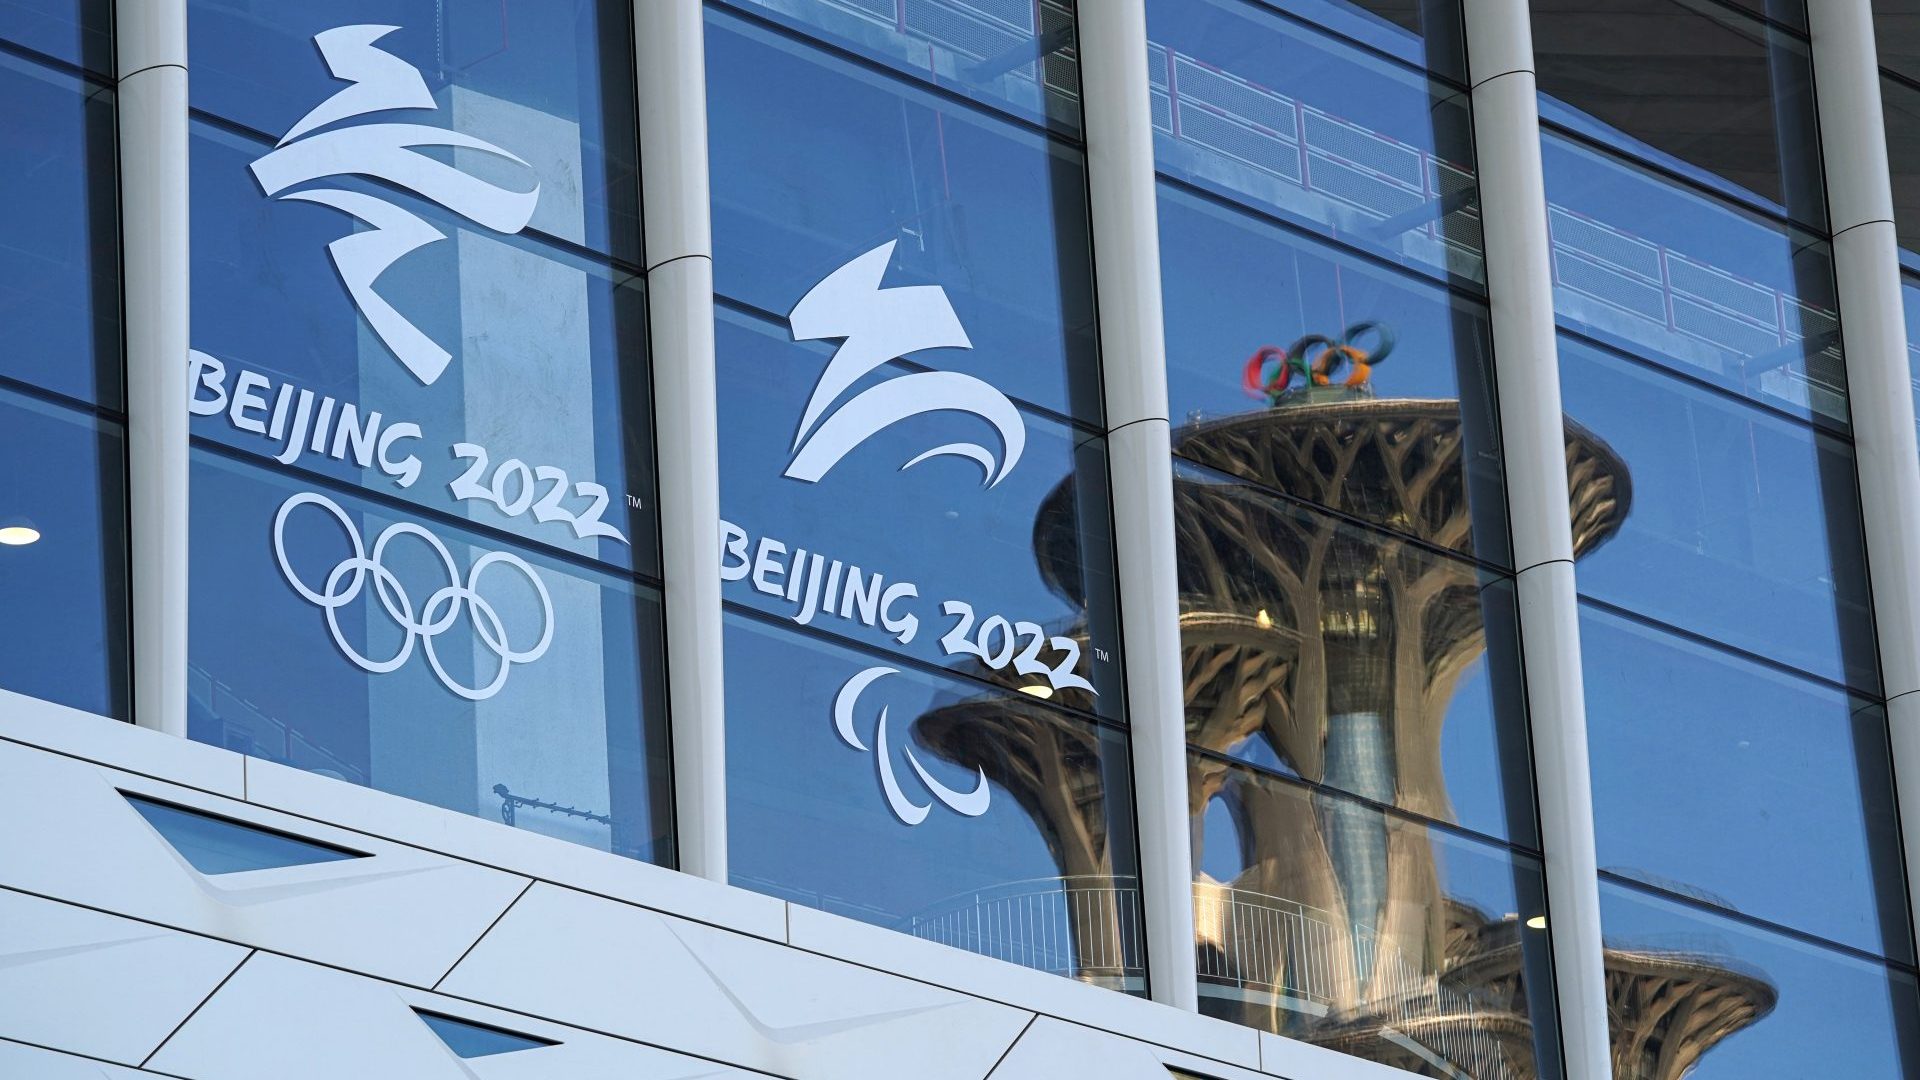 The Beijing 2022 logo is seen on the Main Press Centre ahead of the Beijing 2022 Winter Olympic Games. Photo: Andrew Milligan/PA Wire/PA Images.